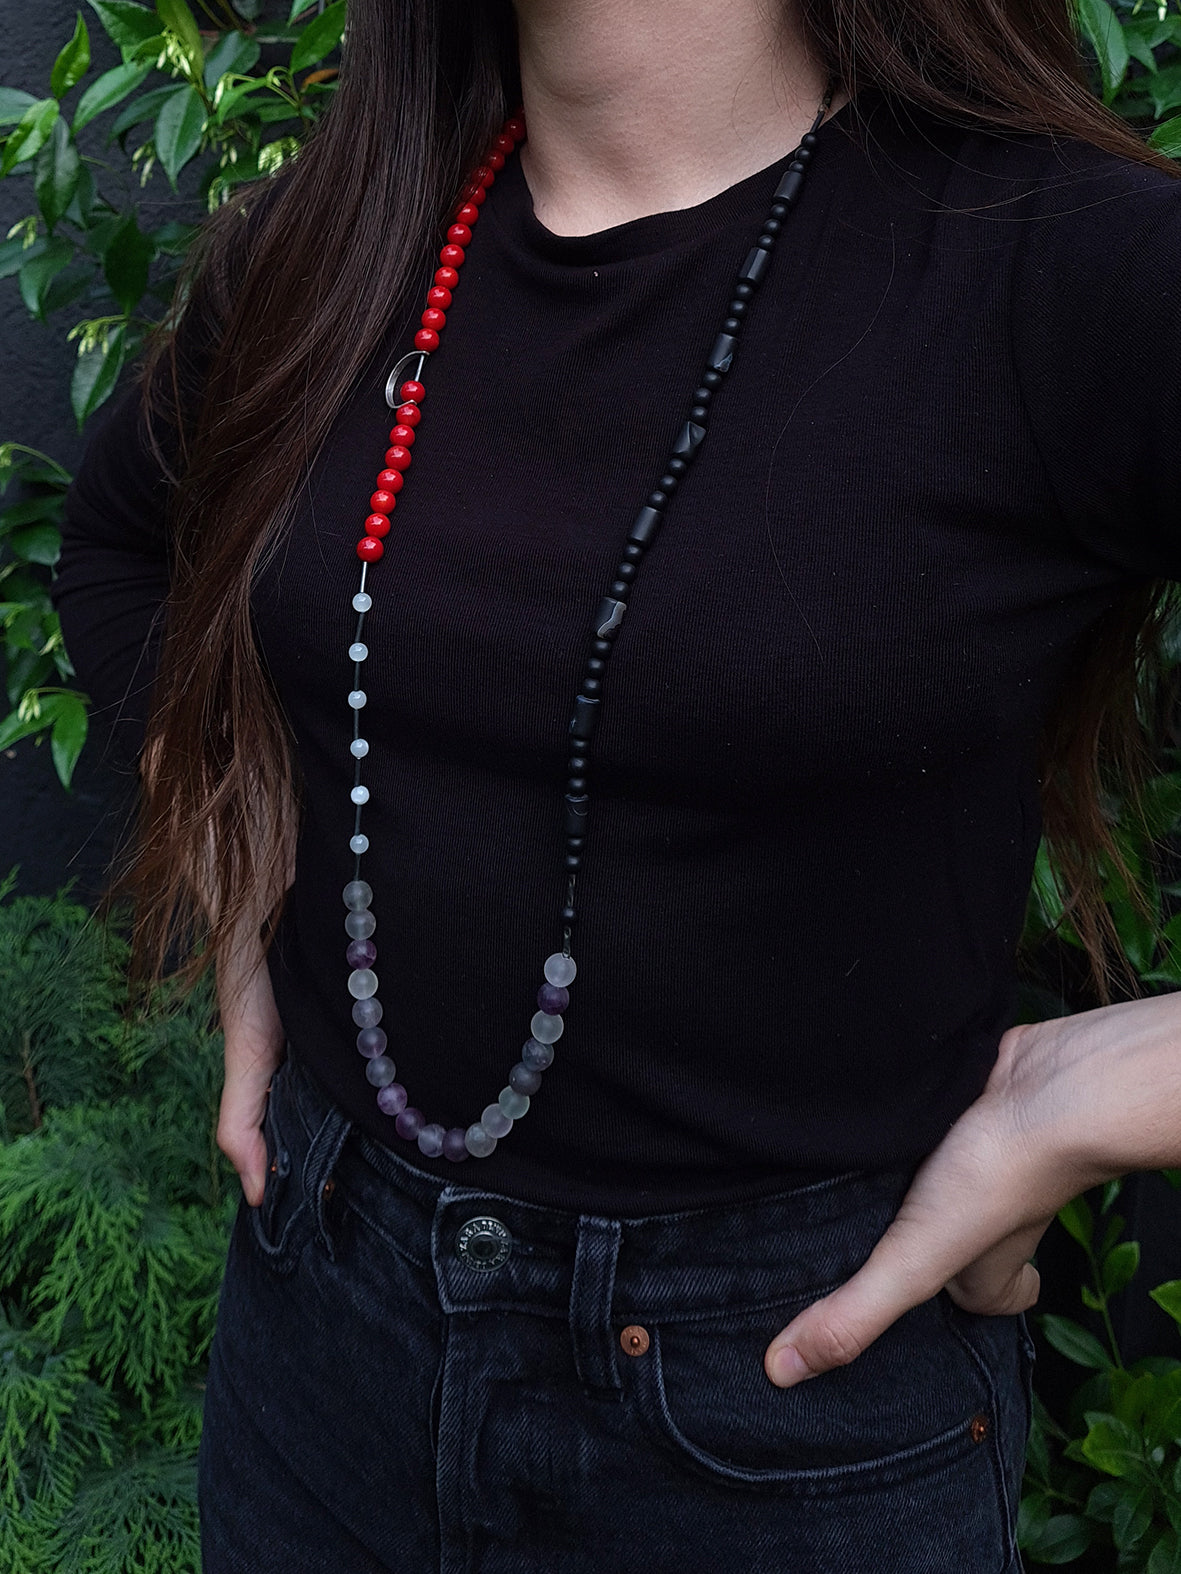 Red & Black. Necklace from the 80 collection.